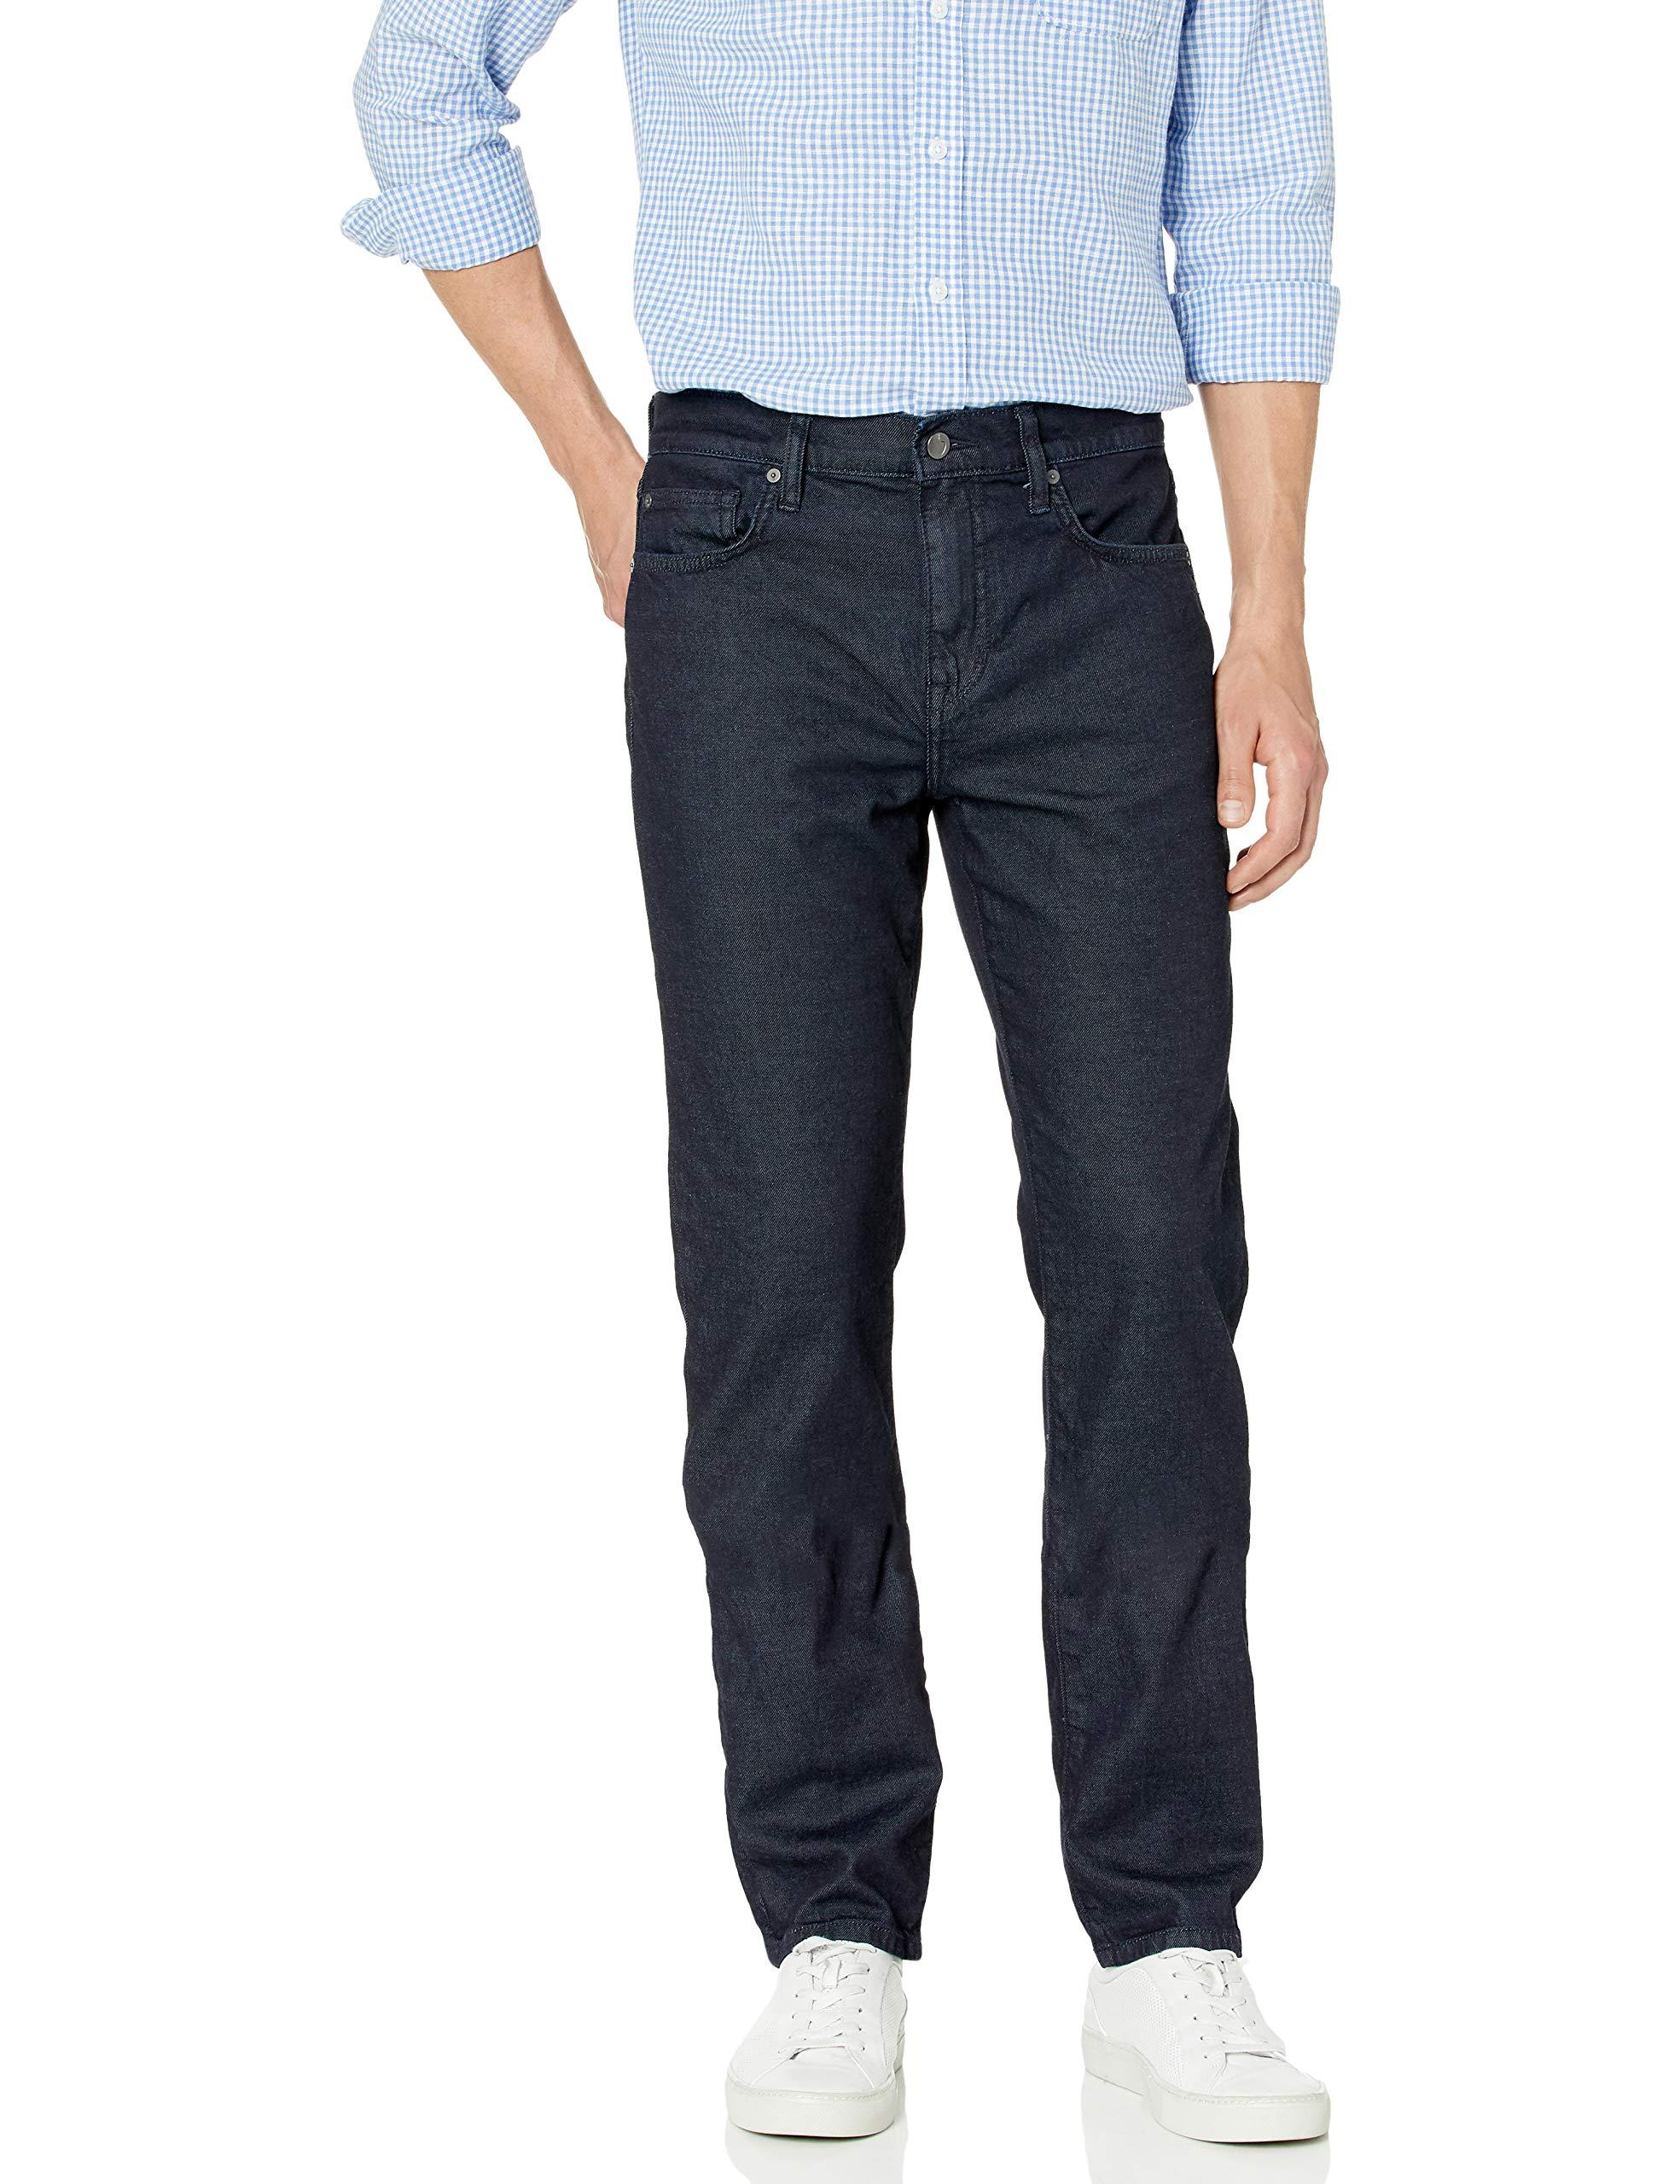 Joe's Jeans Brixton Straight And Narrow Jean in Blue for Men - Lyst